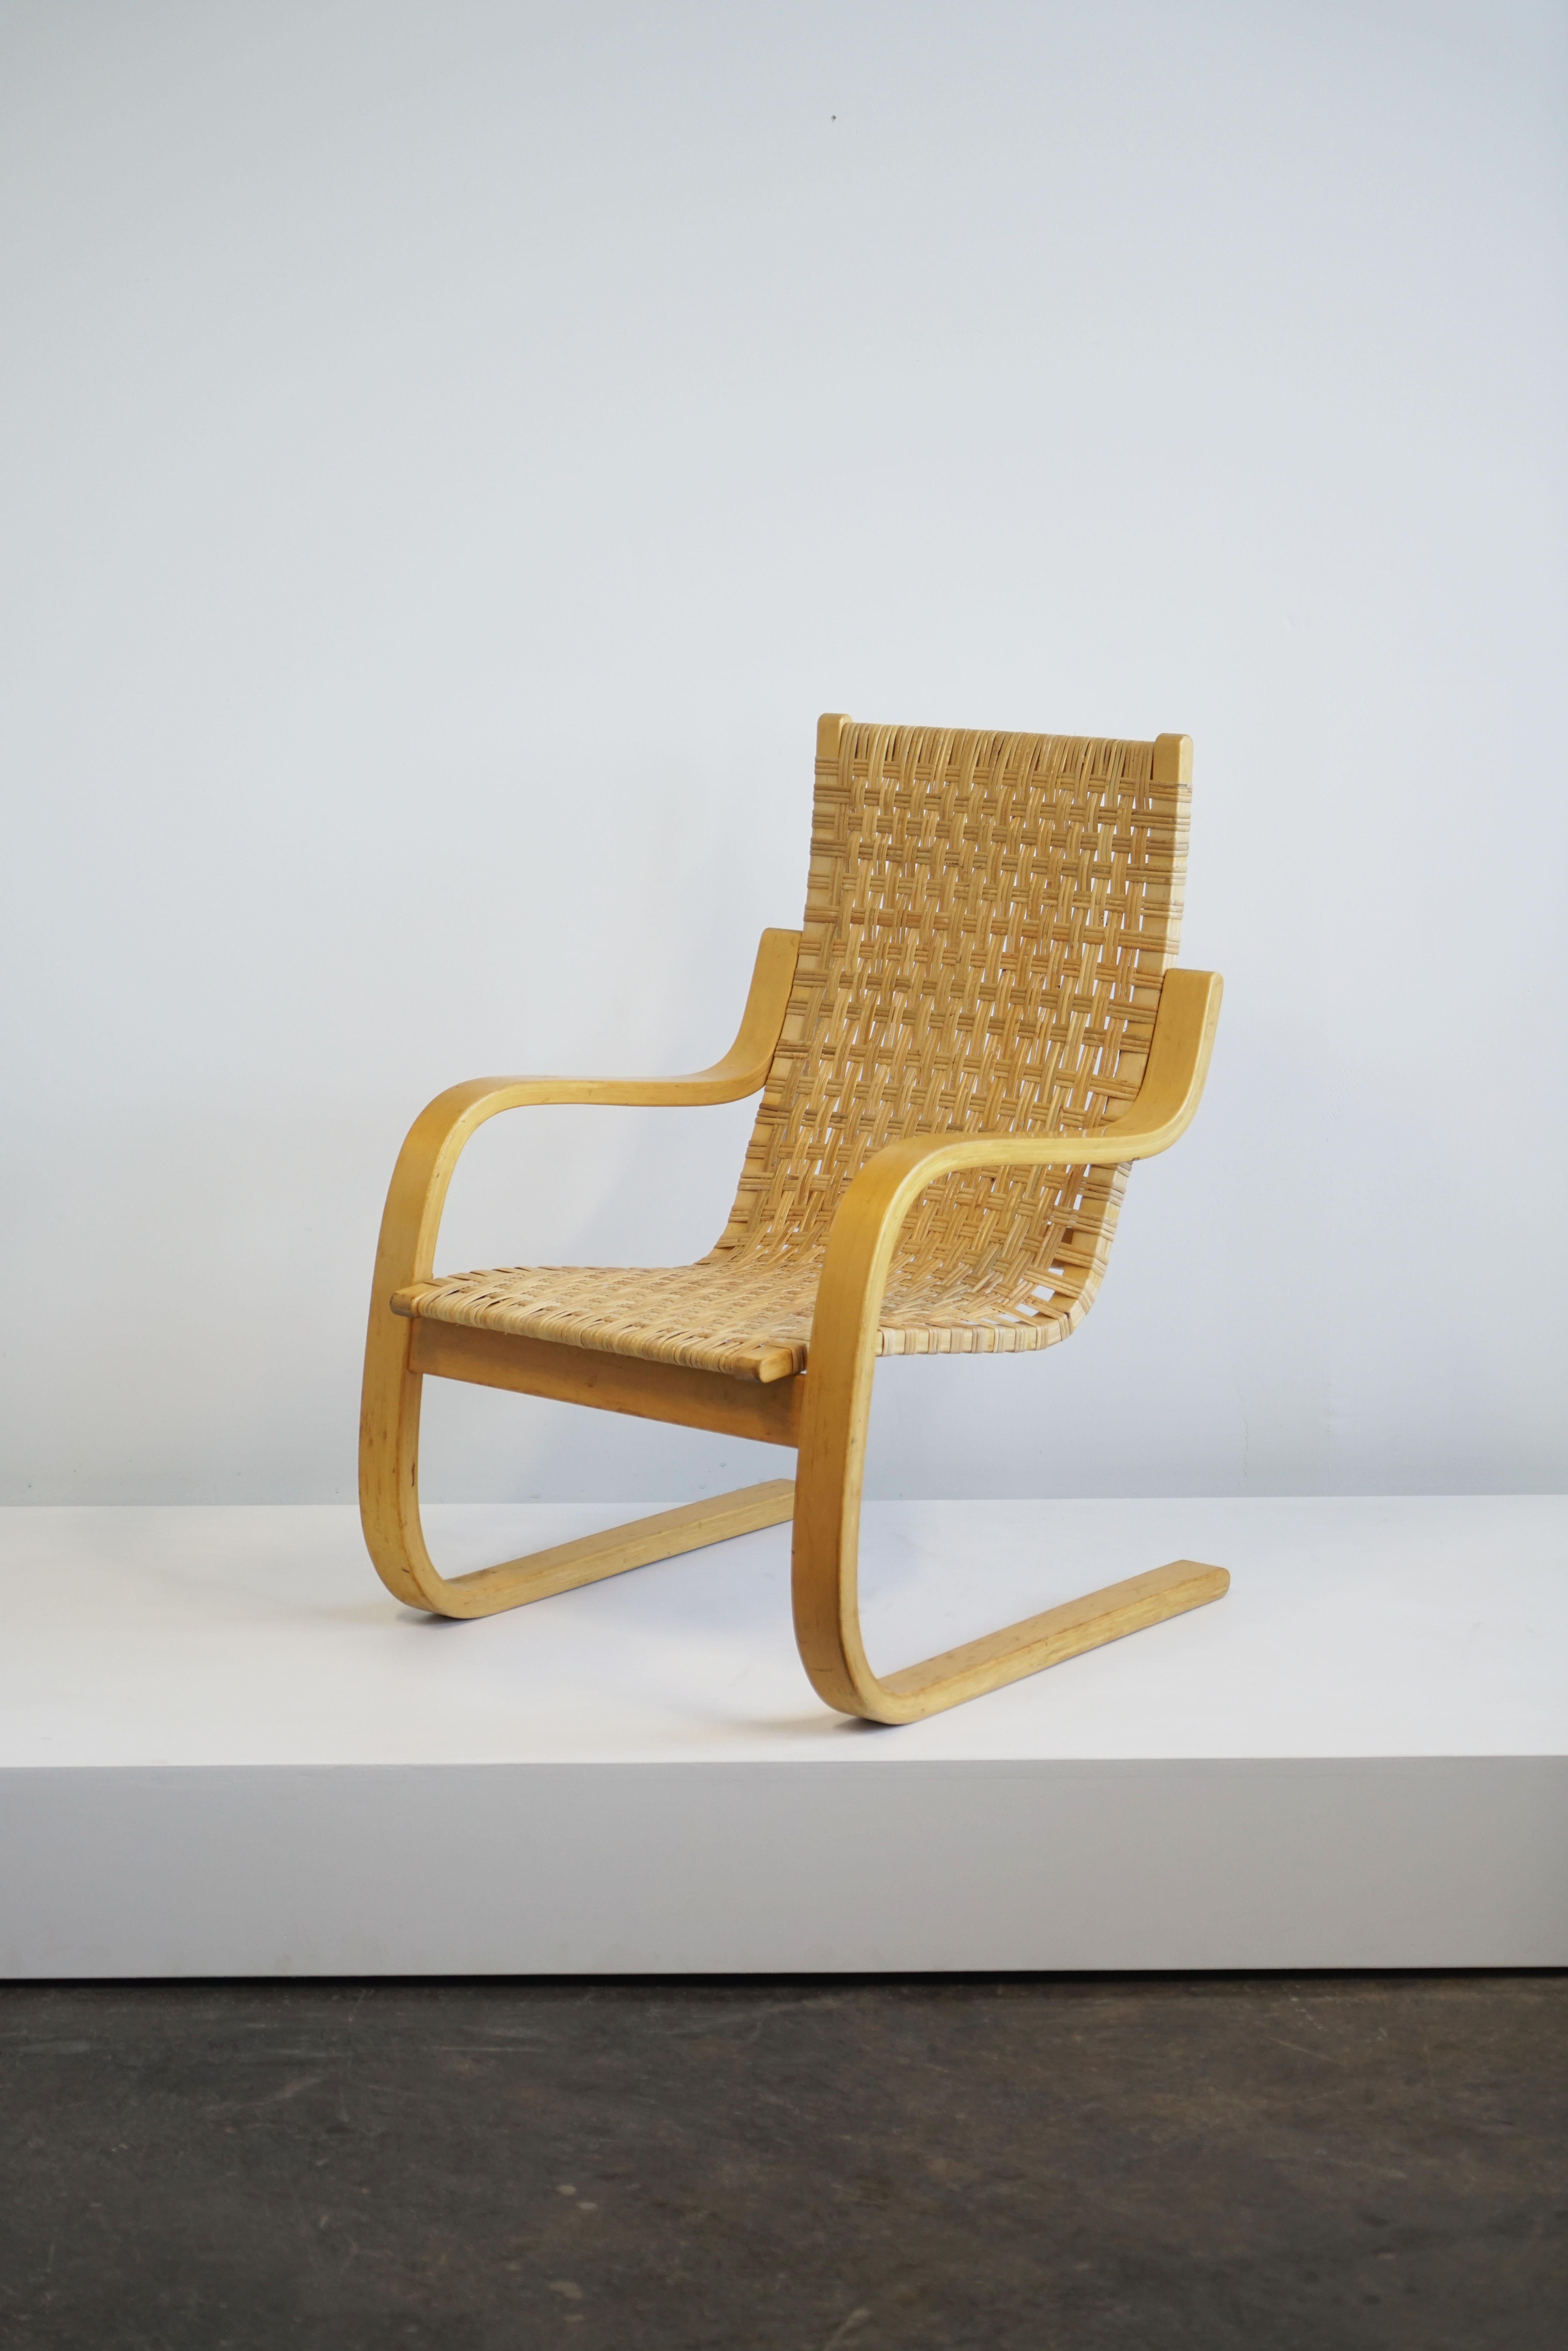 Alvar Aalto, cantilevered chair model 406. 
Laminated birch, cane.
circa 1960

The model 406 chair was originally designed in 1938-39. 
35